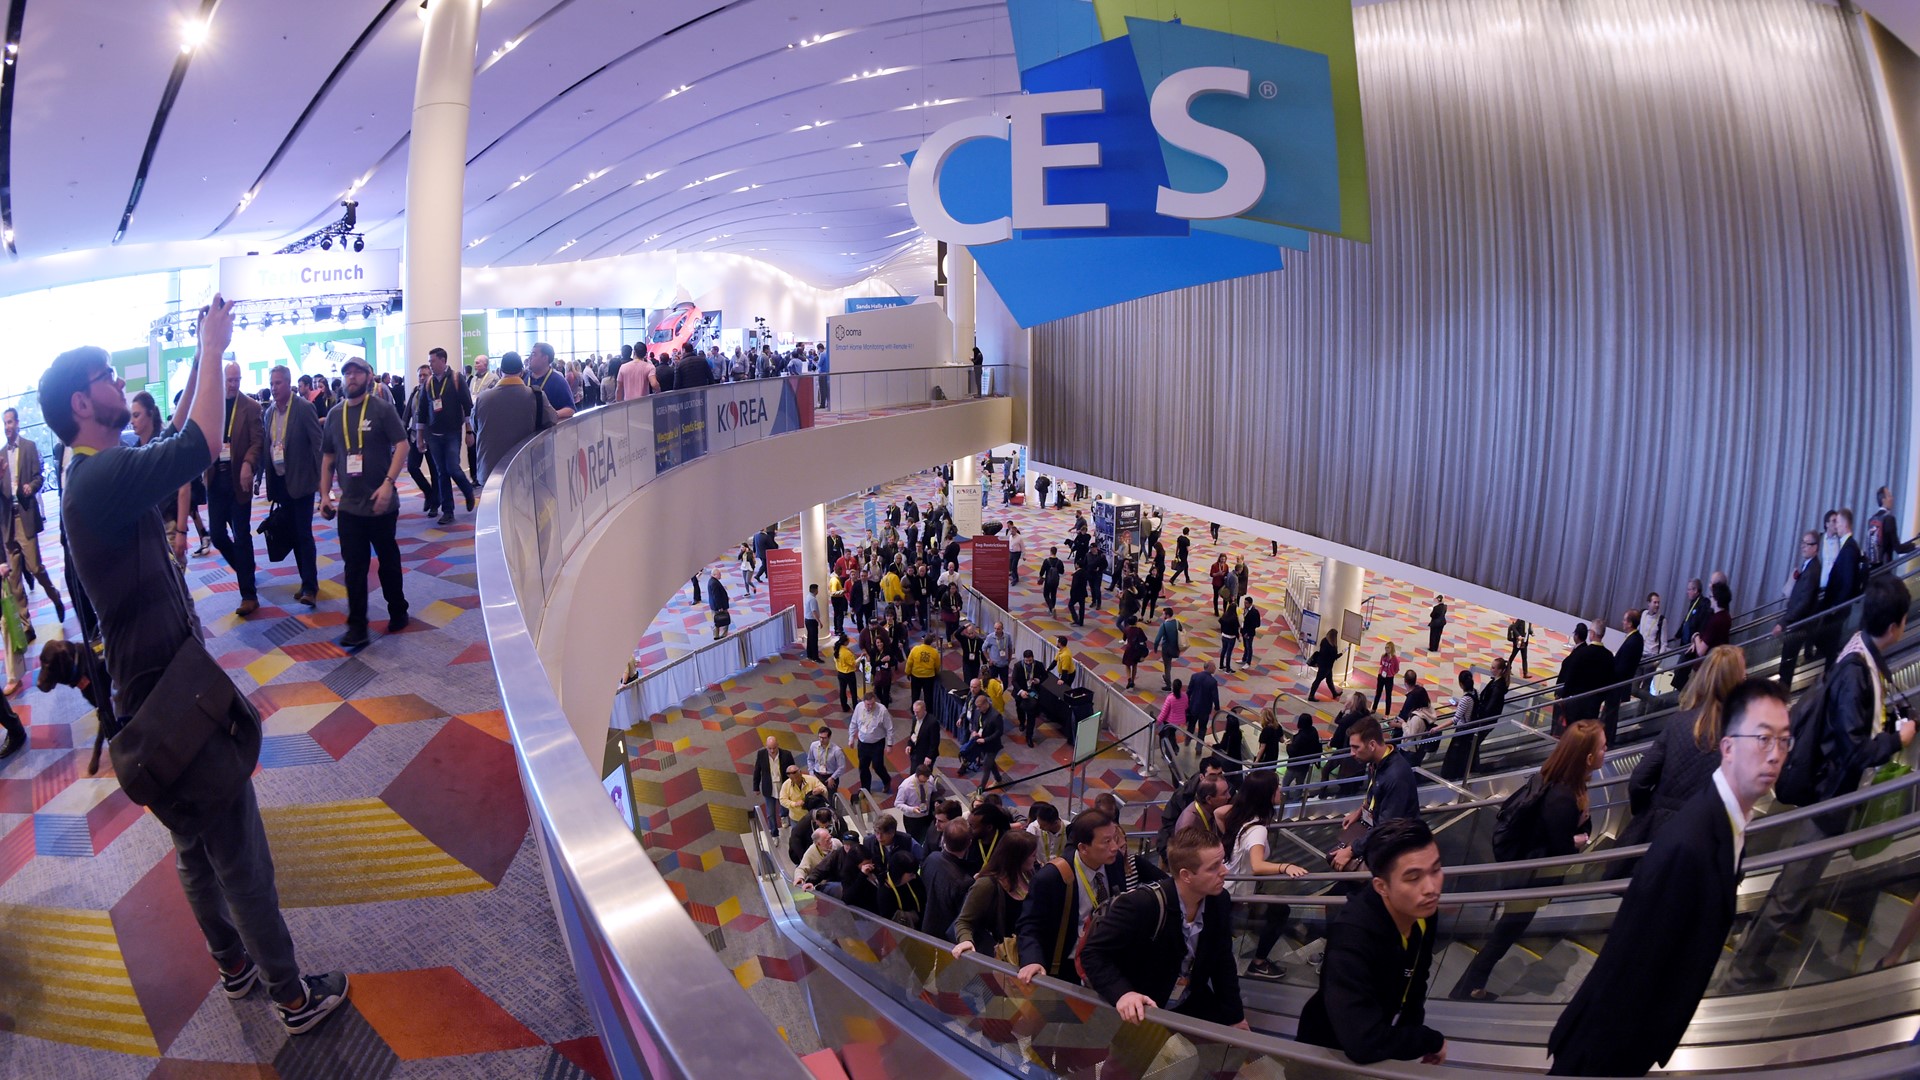 CES attendees at the Sands Convention Center